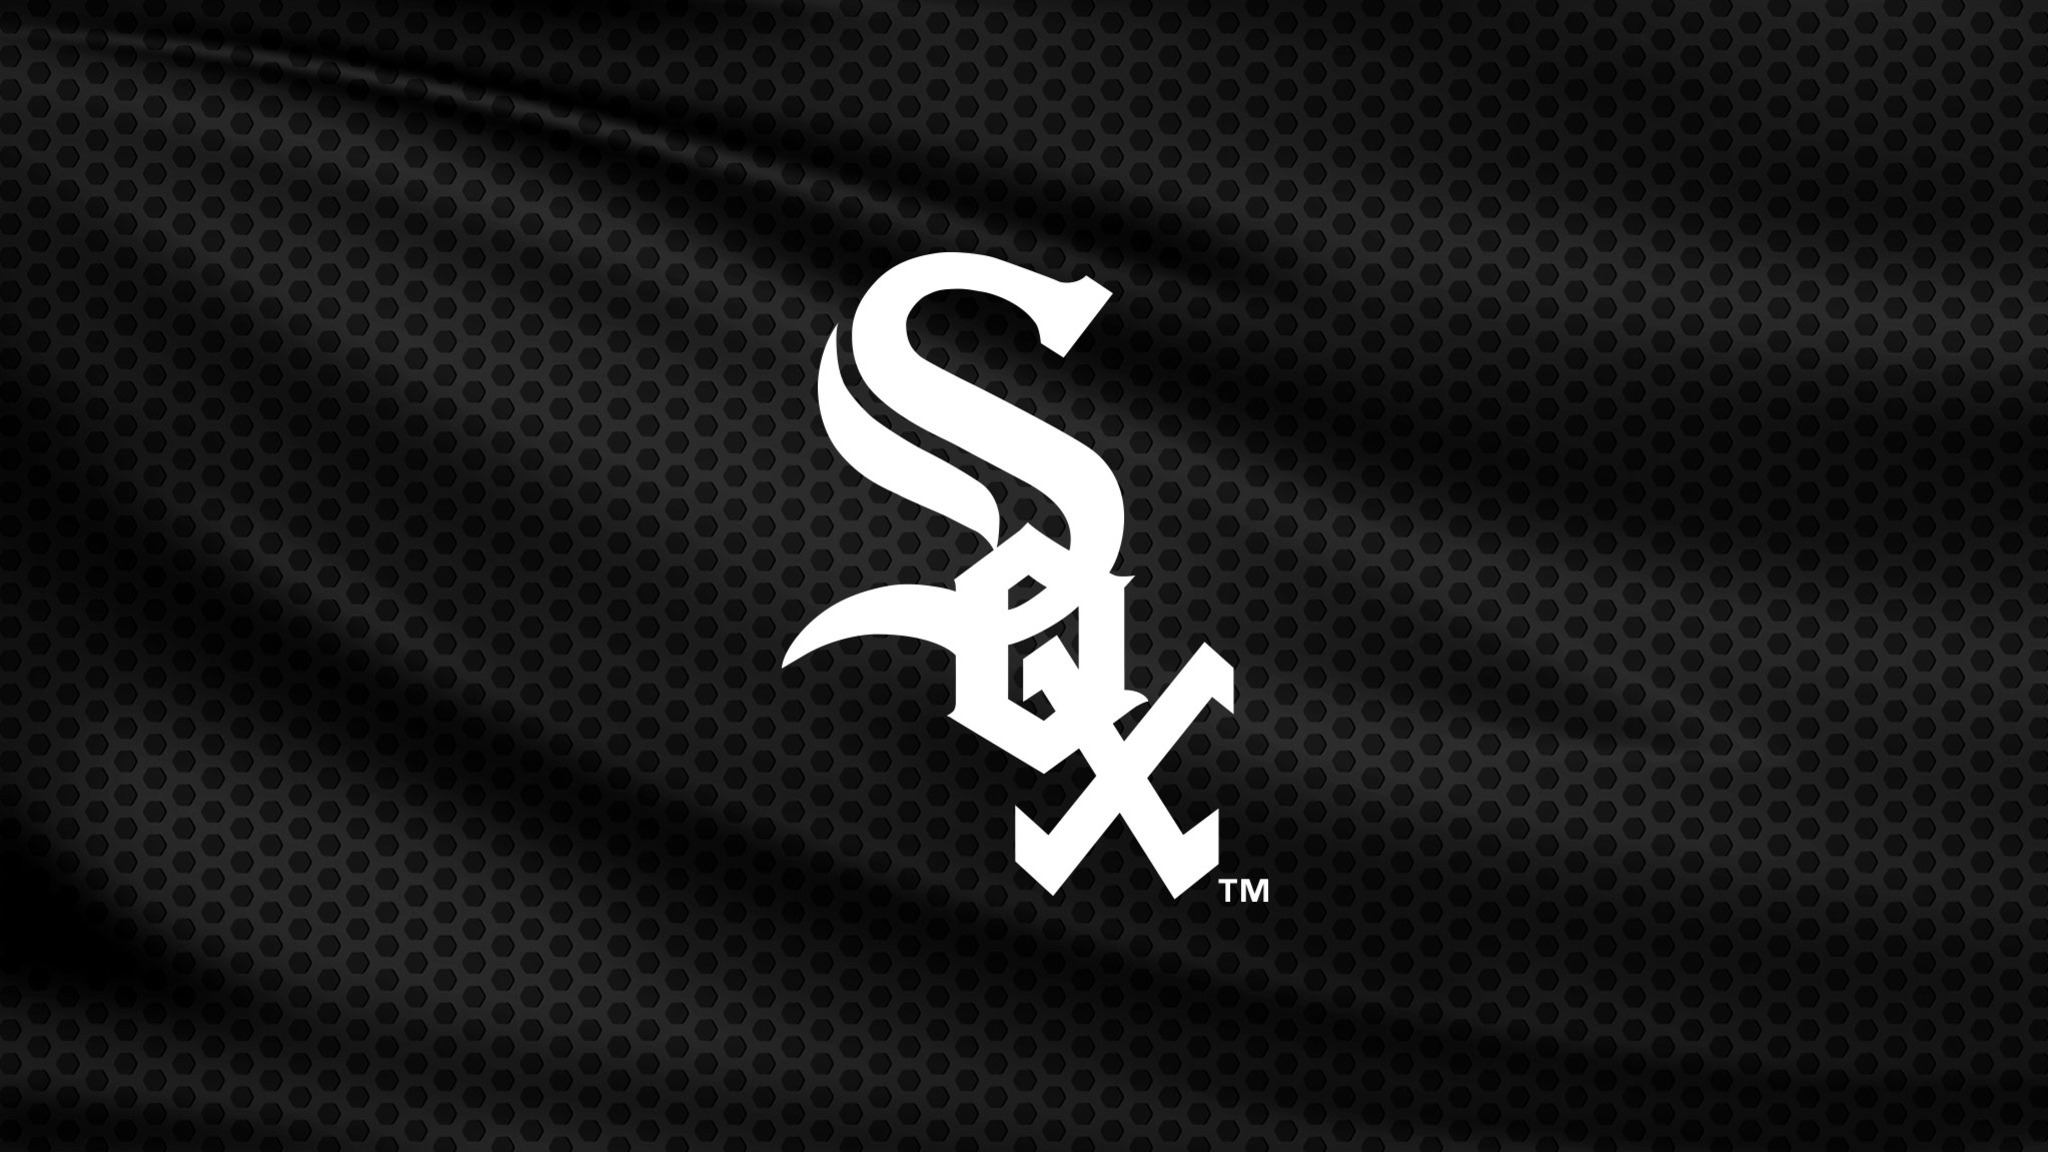 Chicago White Sox to Host Grateful Dead Night in July